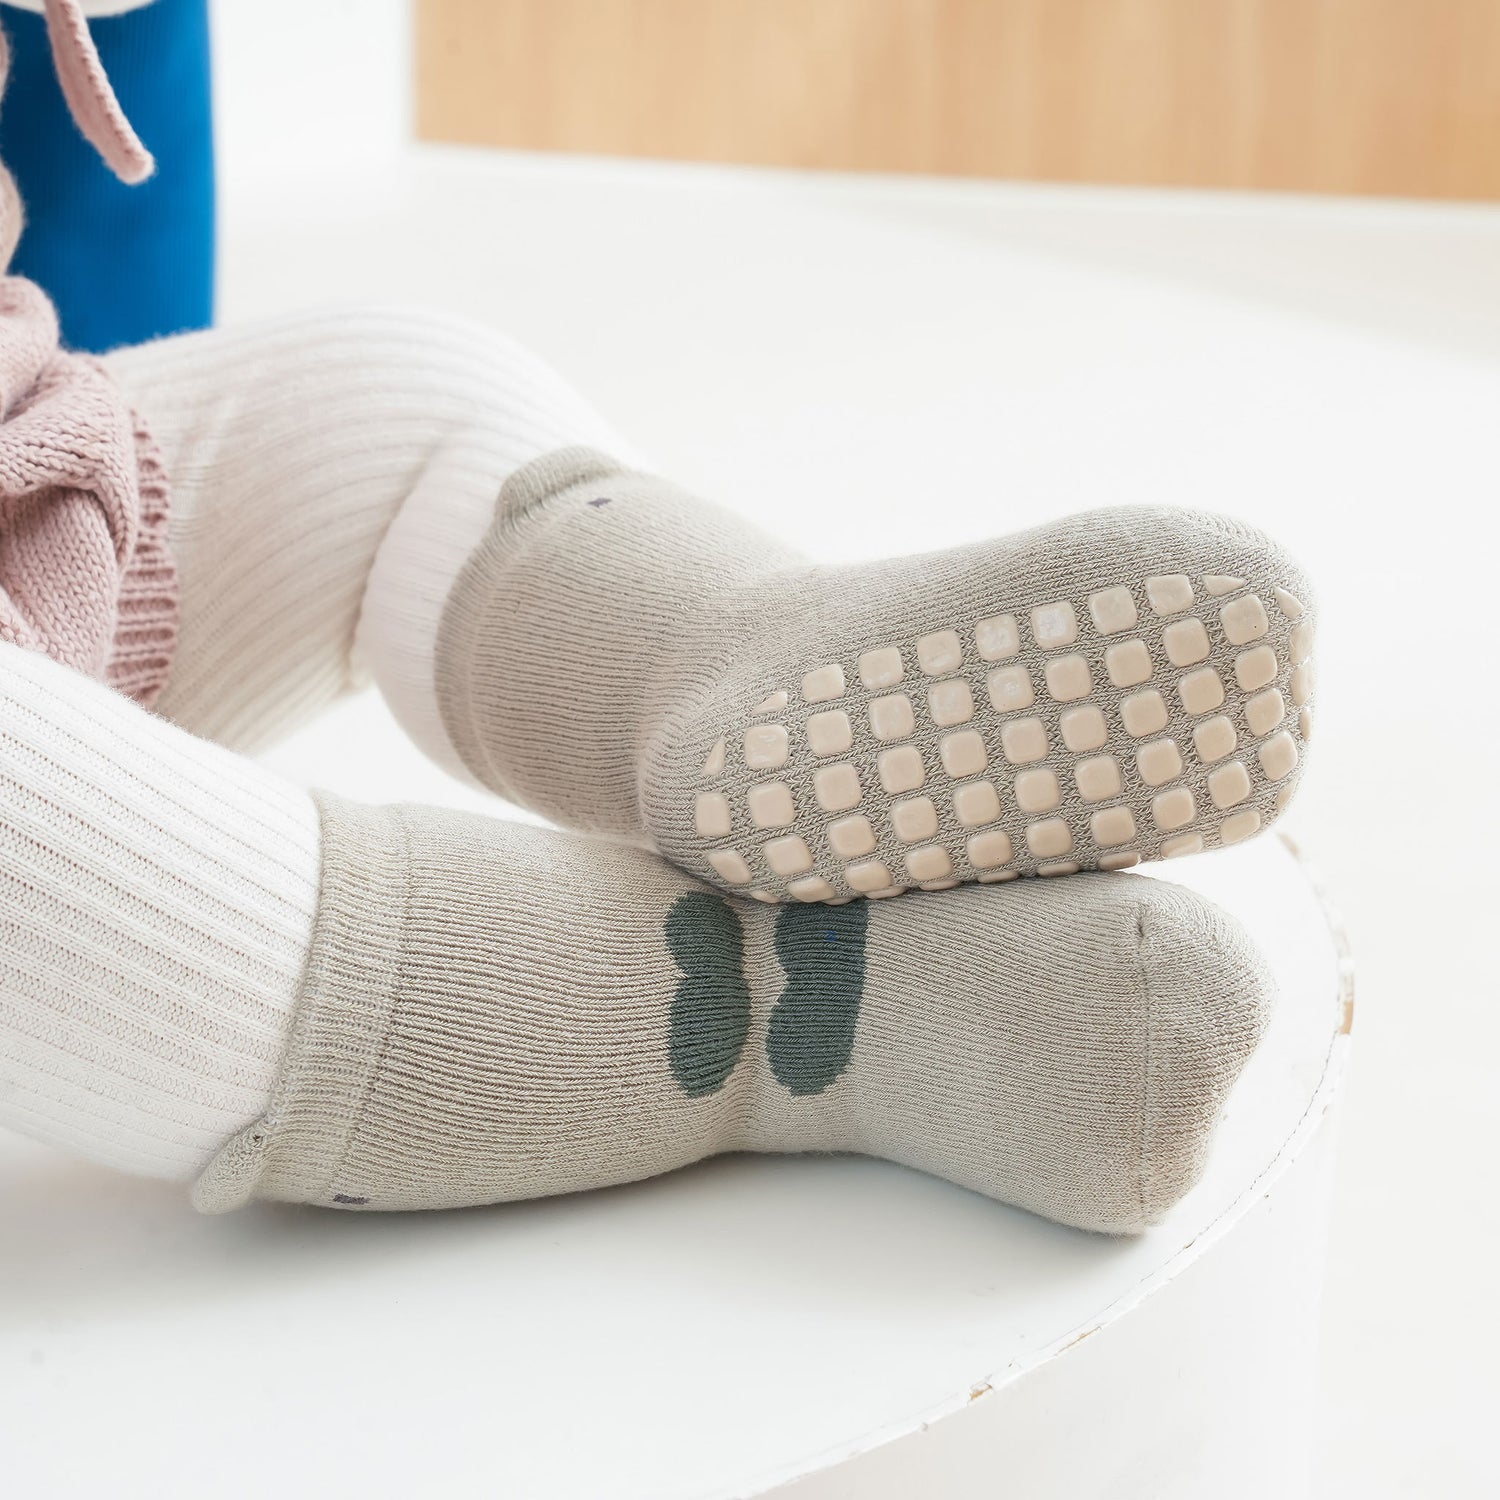 Reliable socks for babies, anti-slip to prevent falls.